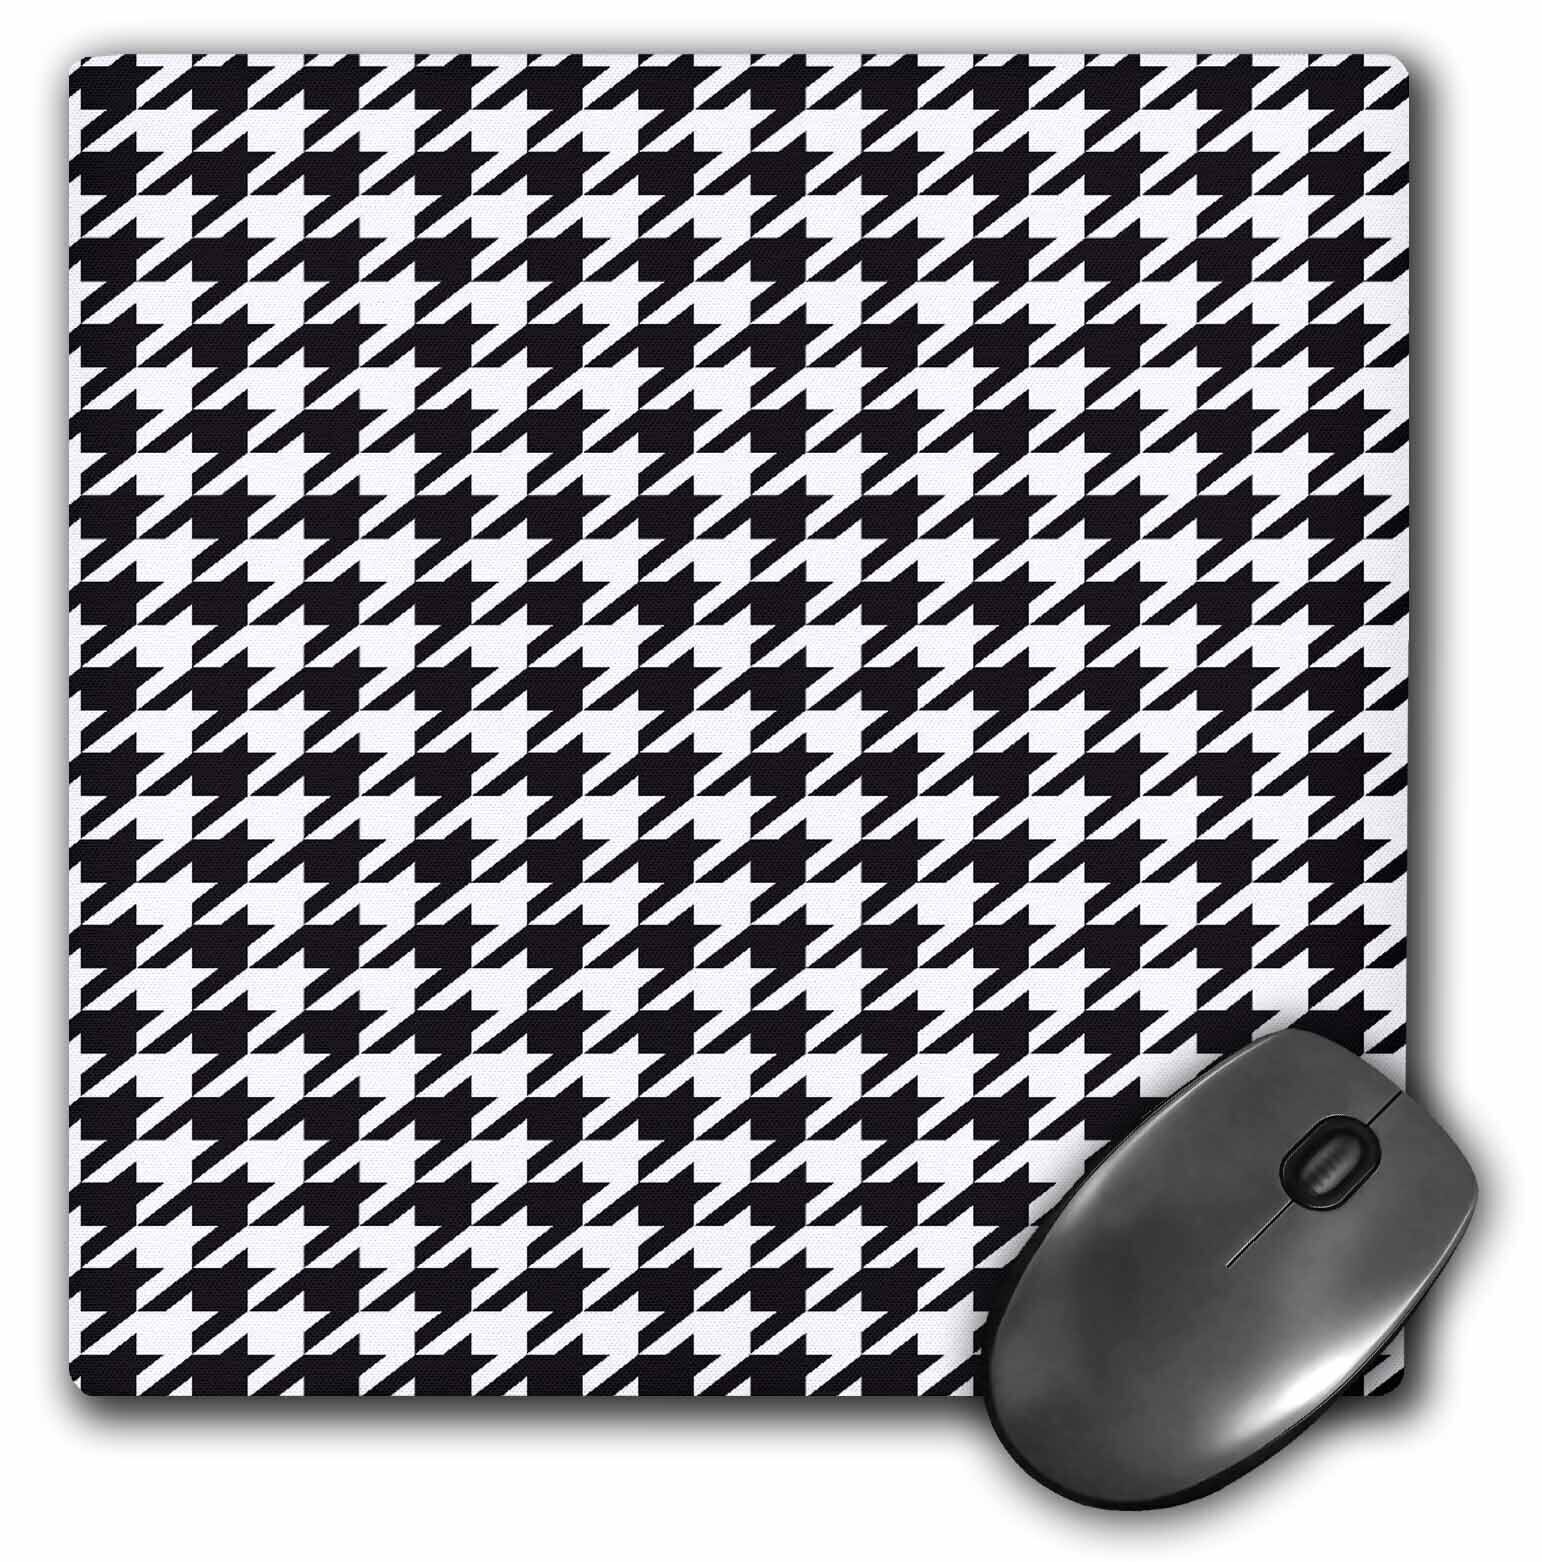 3dRose Black And White Classic Preppy Houndstooth Pattern MousePad